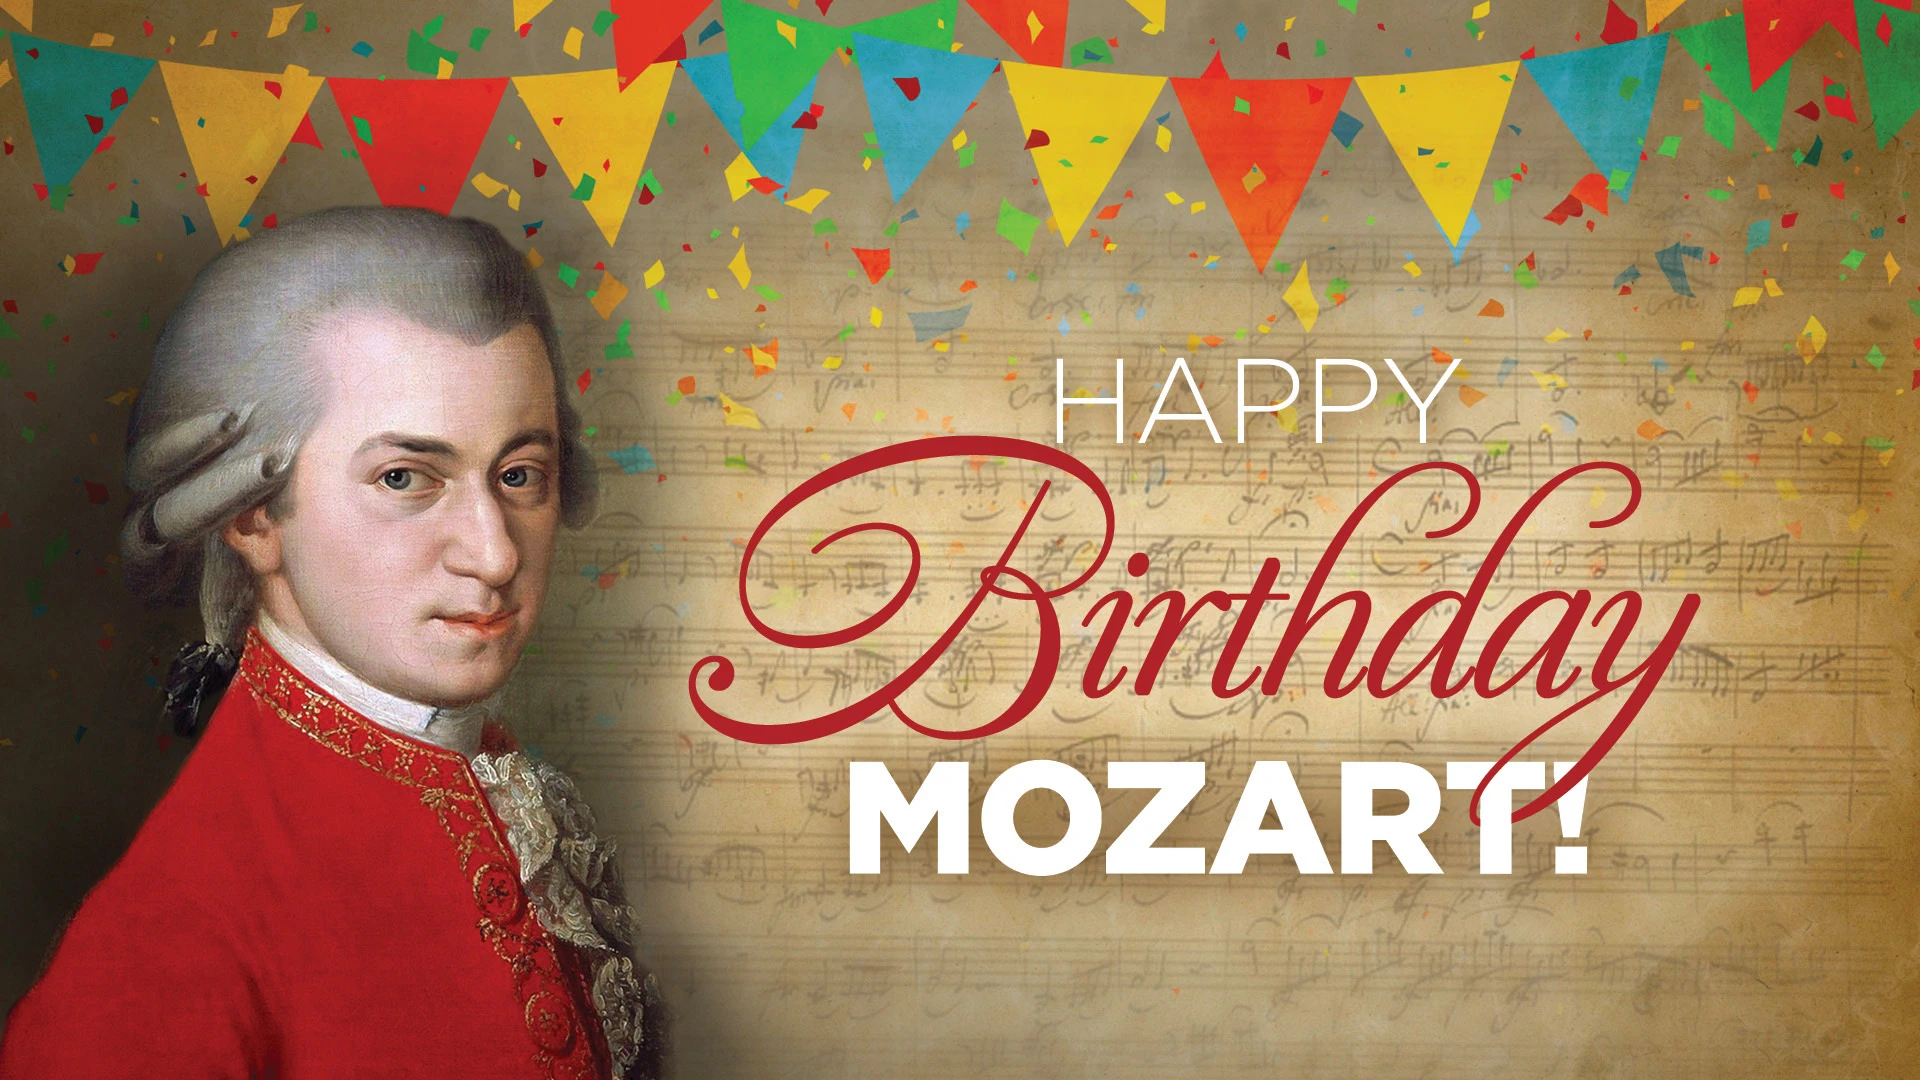 Illustration of Mozart with text that reads: Happy Birthday Mozart!